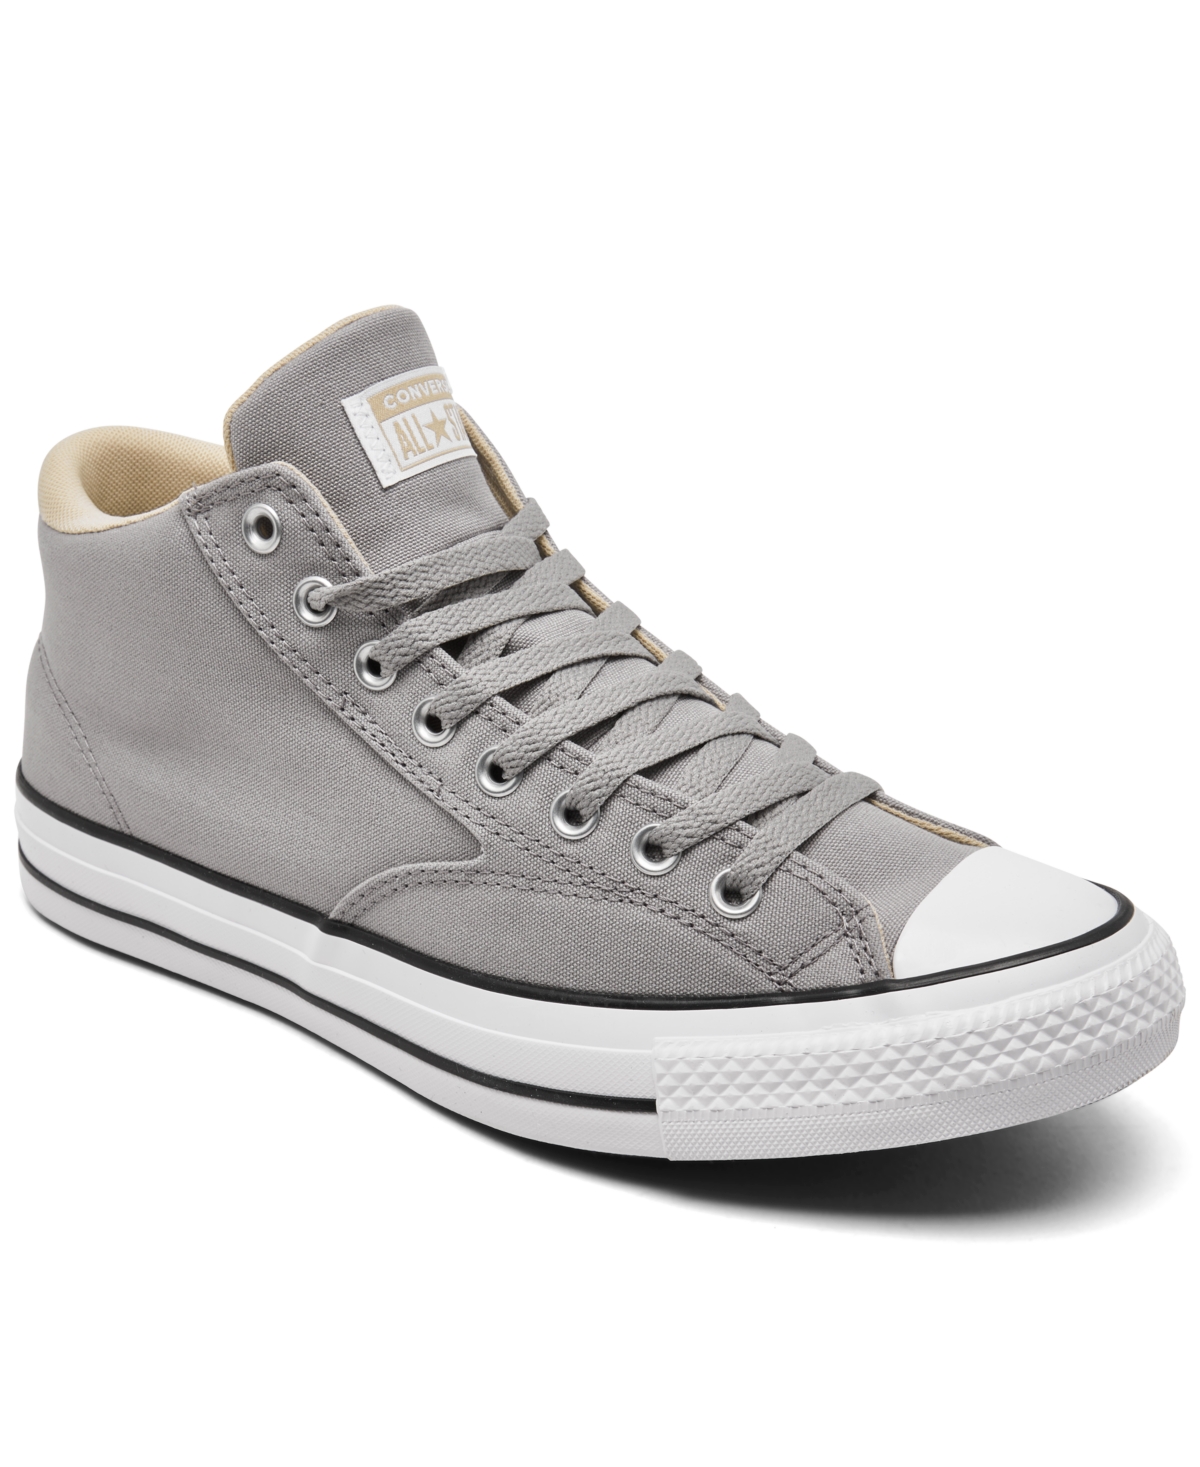 Men's Chuck Taylor All Star Malden Street Casual Sneakers from Finish Line - Totally Neutral